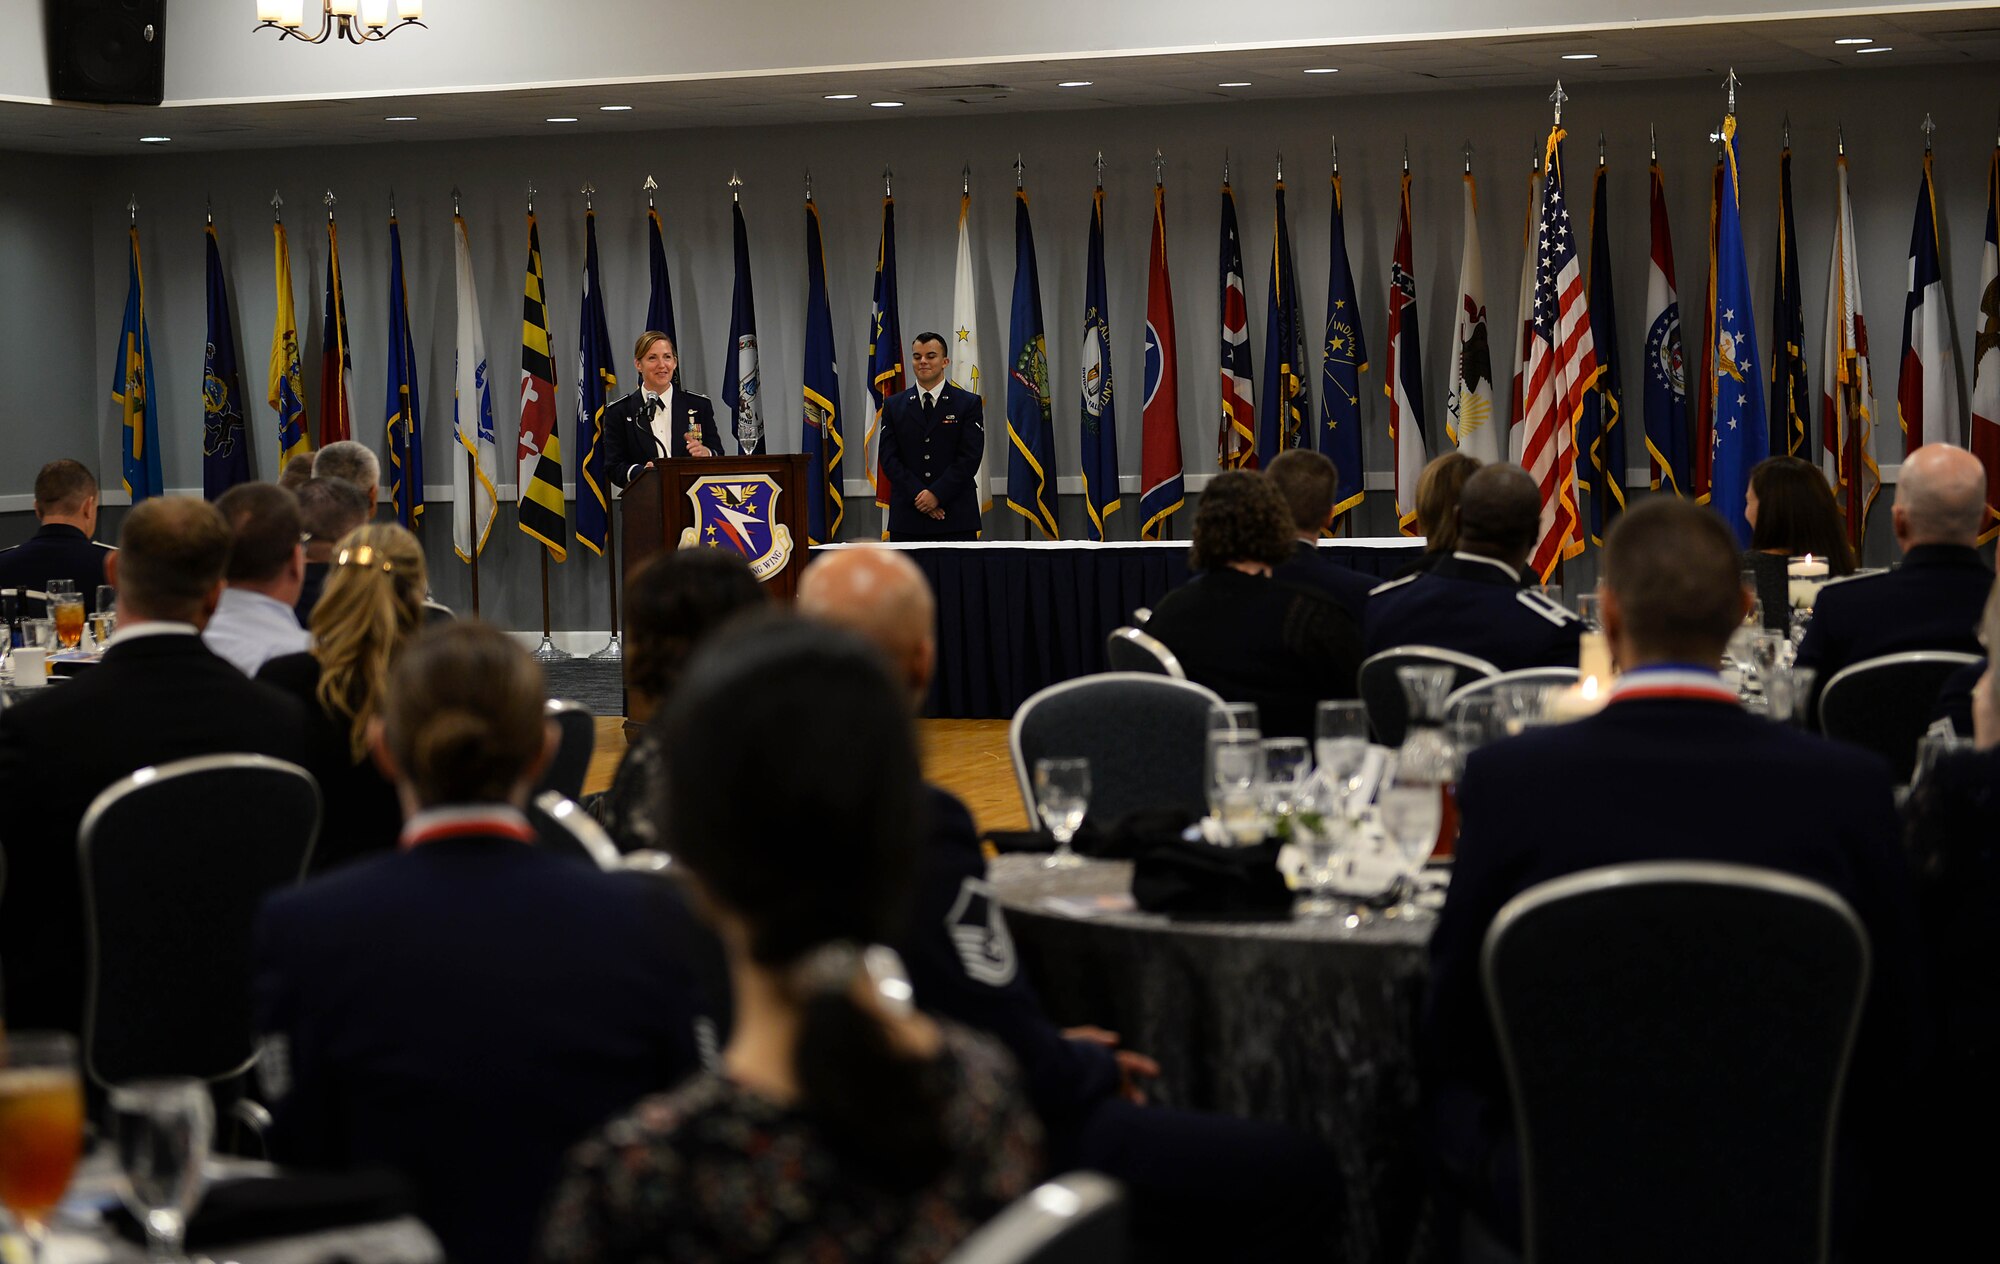 Col. Samantha Weeks, 14th Flying Training Wing commander, speaks to attendees during a Senior NCO Induction Ceremony Sept. 9, 2019, at the Club on Columbus Air Force Base, Miss. Toward the end of the ceremony Weeks thanked all those who coordinated the event, those who attended and reminded the inductees to look around the room and take in those who support them and attended this ceremony recognizing their achievement.  (U.S. Air Force photo by Airman 1st Class Hannah Bean)